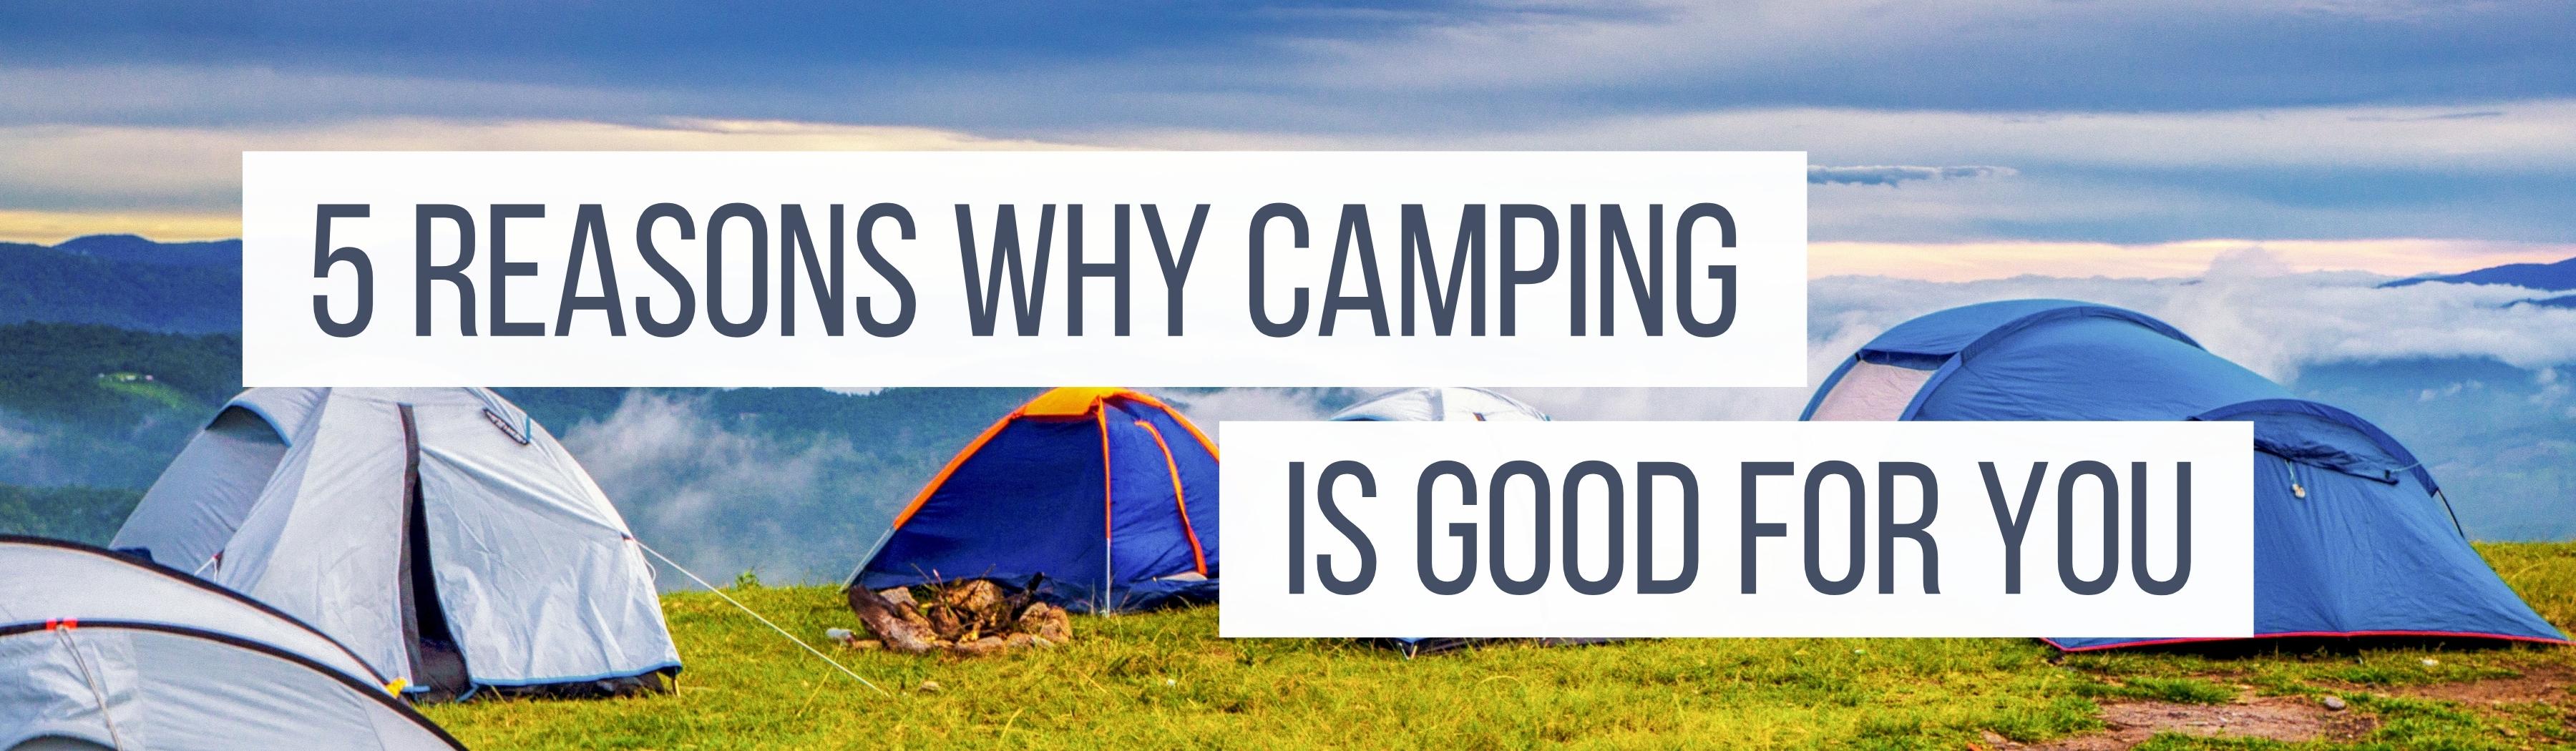 A selection of tents camped up on some grass overlooking mountains. 5 Reasons Why Camping Is Good For You by Webbs.